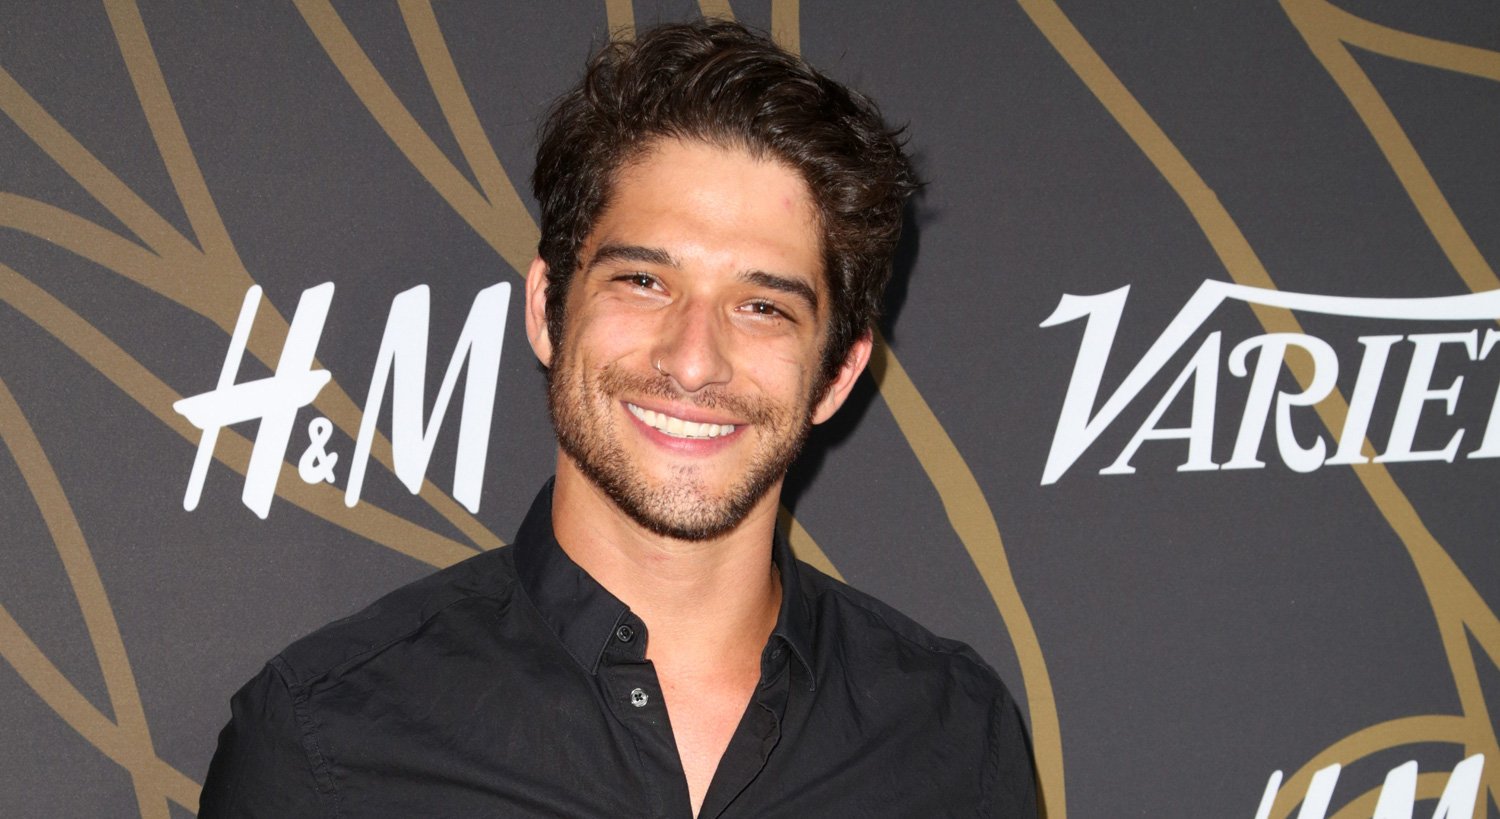 Tyler Posey Addresses Leaked Video Scandal for the First Time.